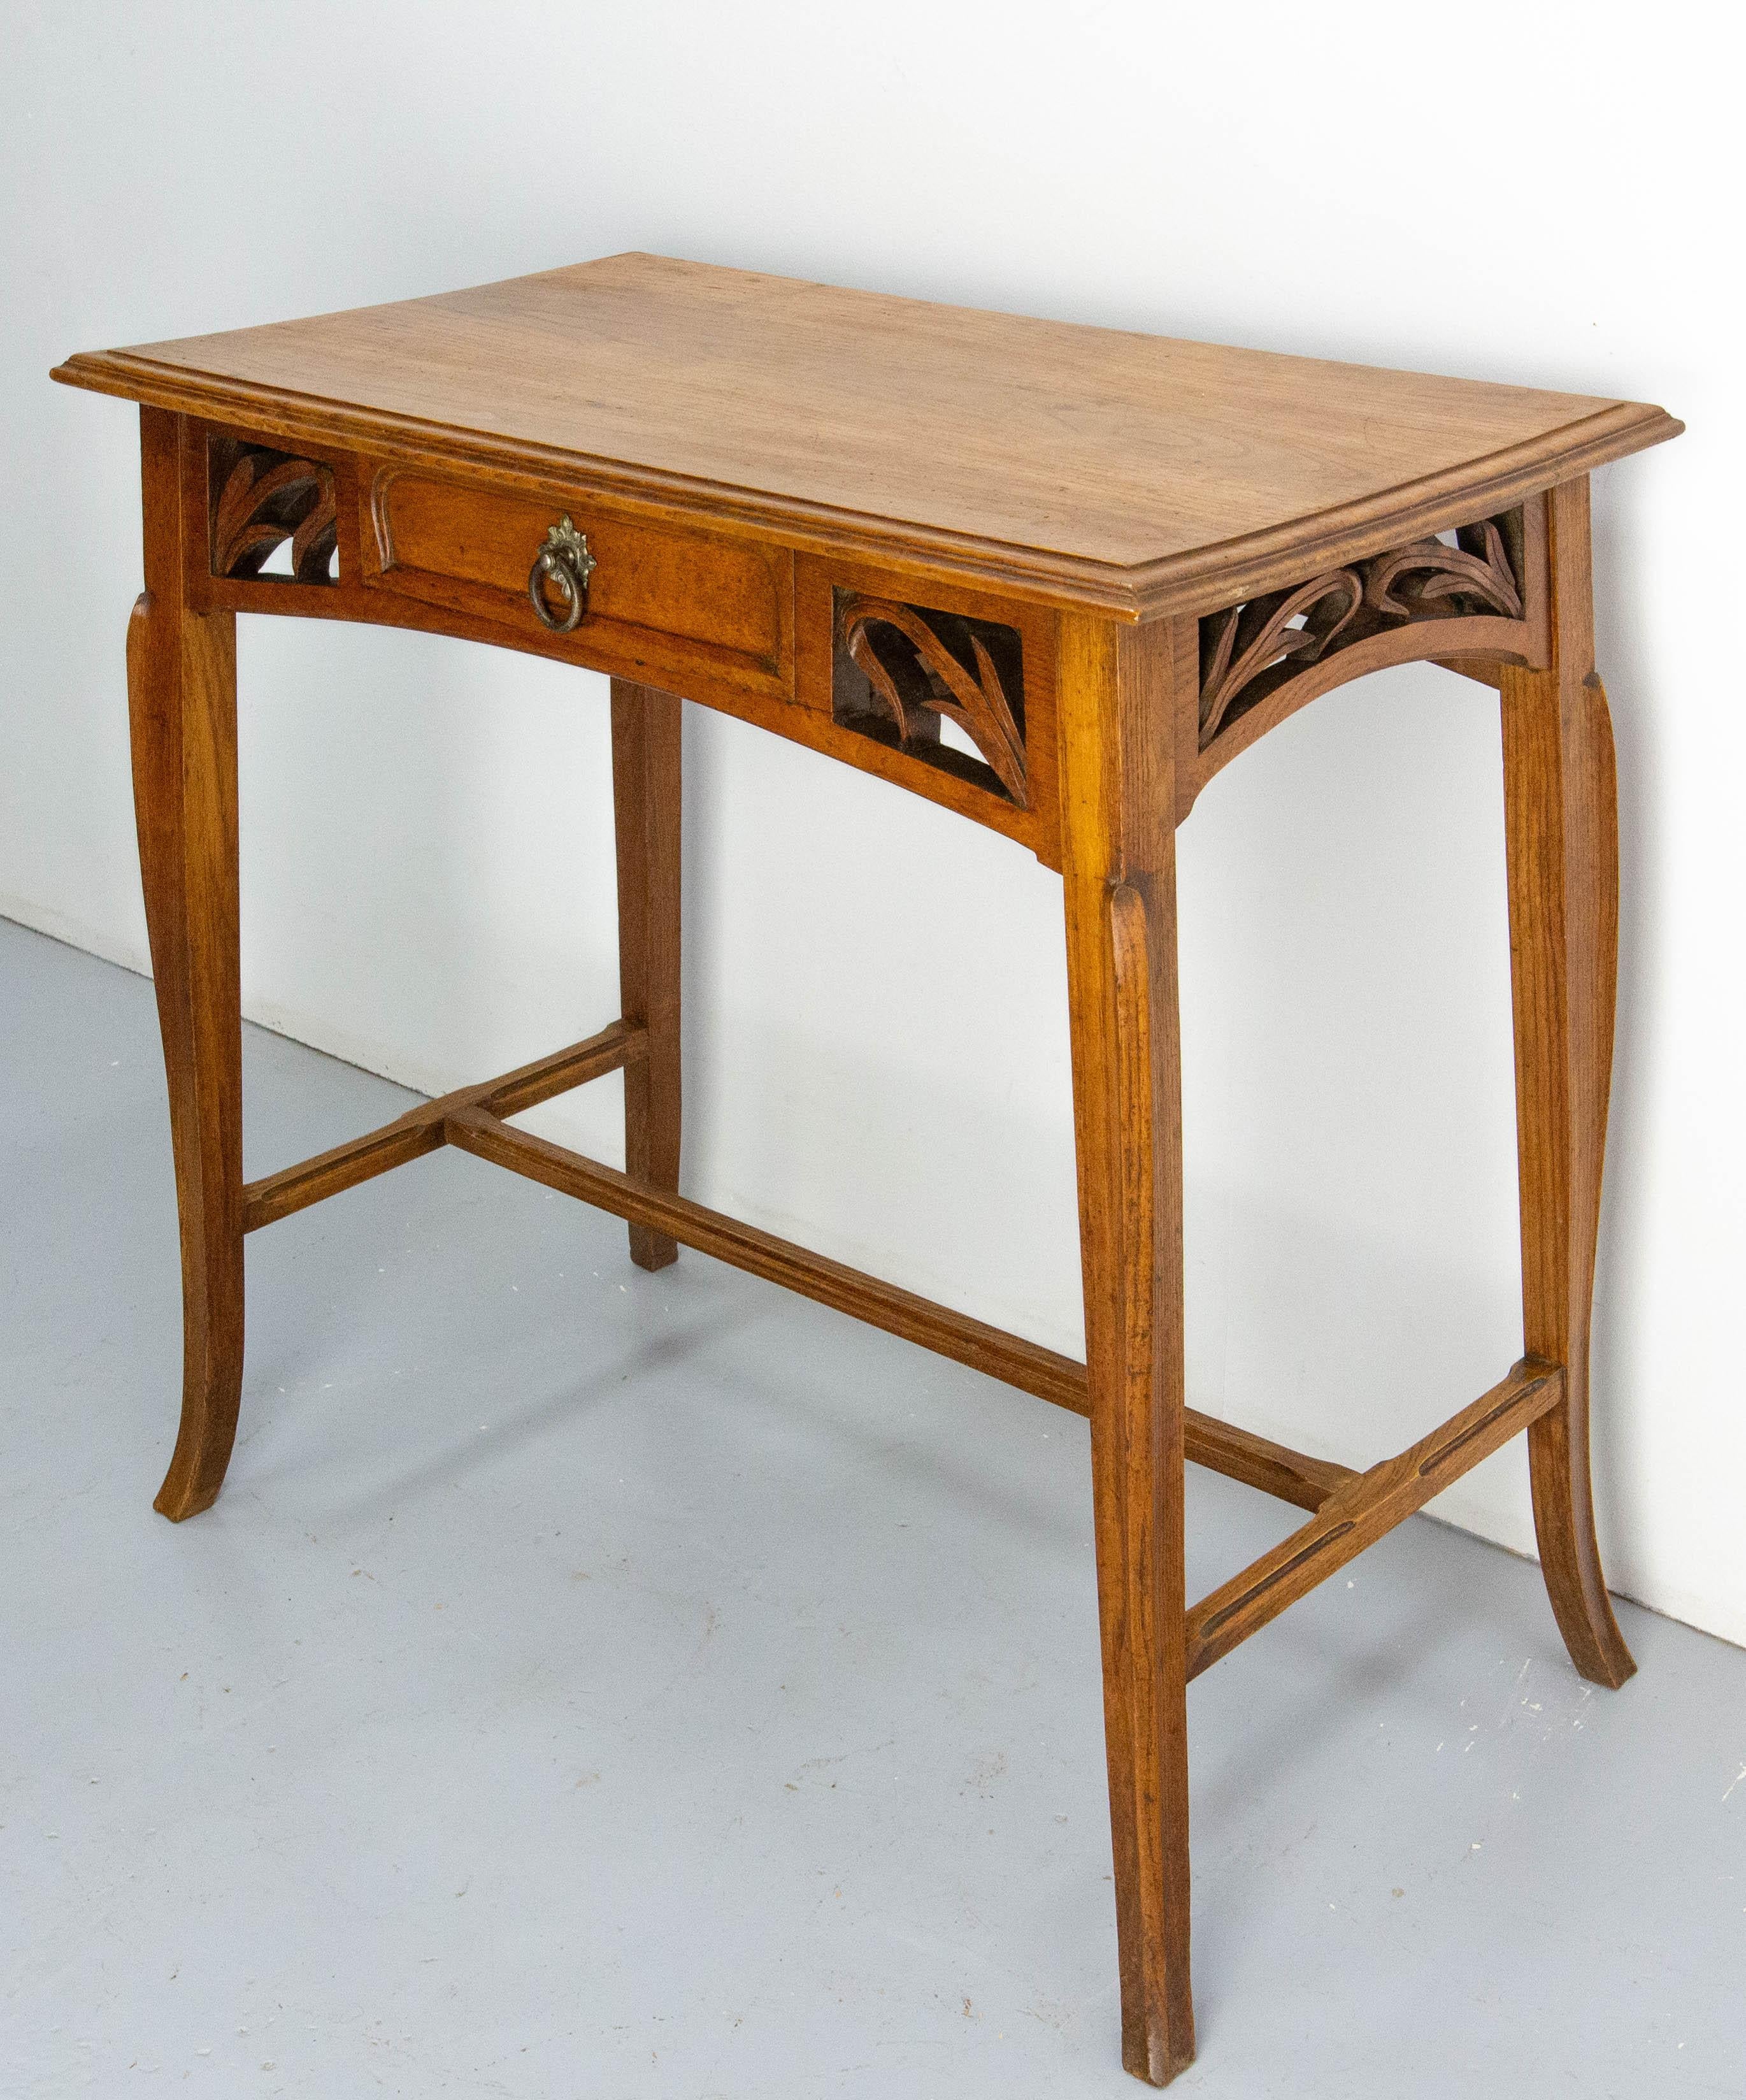 French Art Nouveau Oak Side Table Writing Table Vegetal Ornementation, c 1900 In Good Condition For Sale In Labrit, Landes